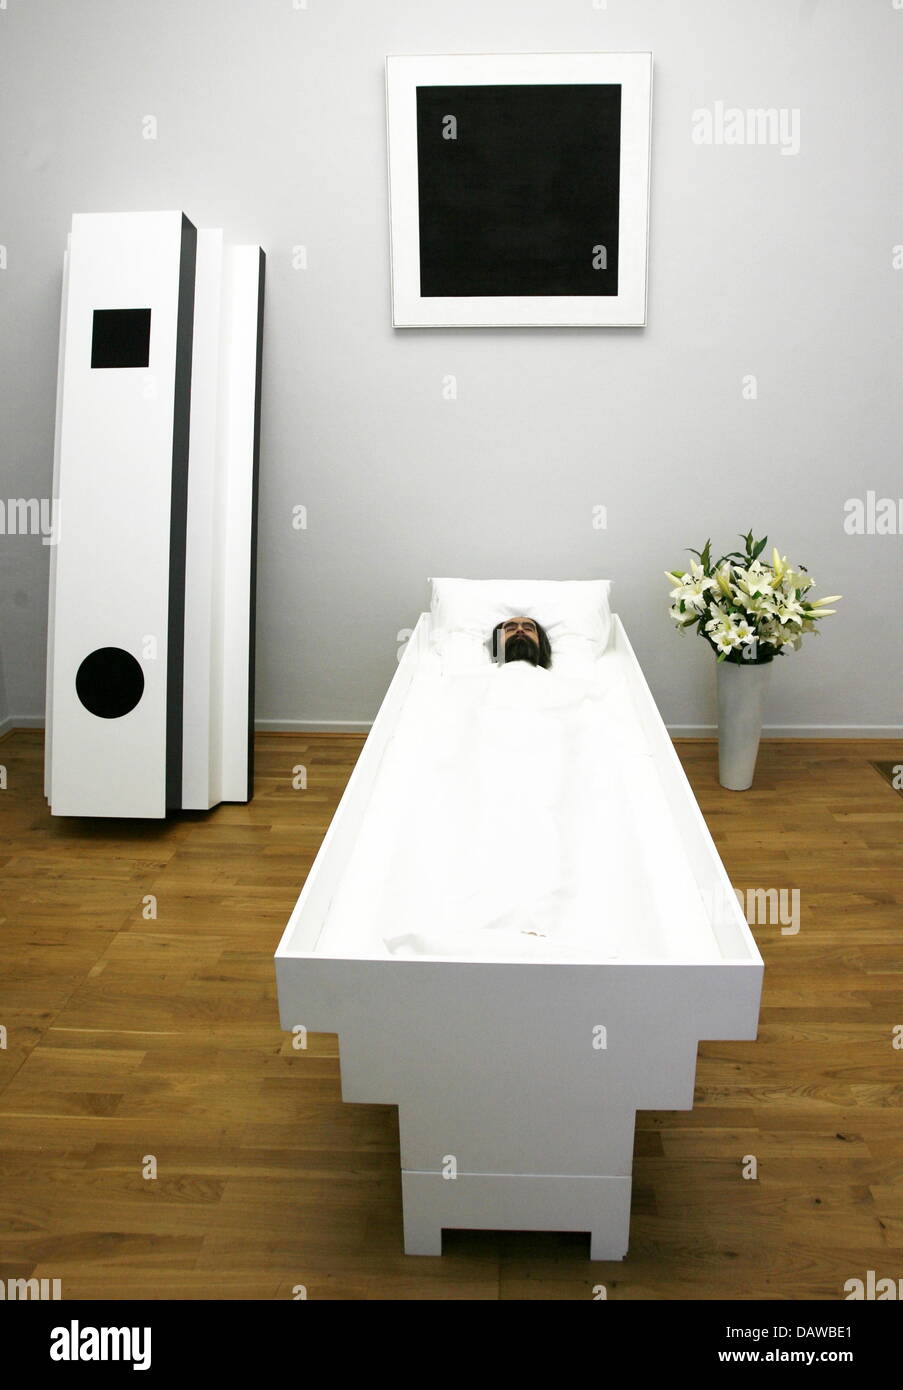 The picture shows the installation 'Corpse of Art' (2003) by artists group 'IRWIN' at museum 'Kunsthalle' in Hamburg, Germany, Thursday 22 March 2007. The art work, resembling the 1935 coffin of Kazimir Malevich, is part of the exhibition 'Black Square. Hommage à Malevich', which opens 23 March 2007. Photo: Maurizio Gambarini Stock Photo